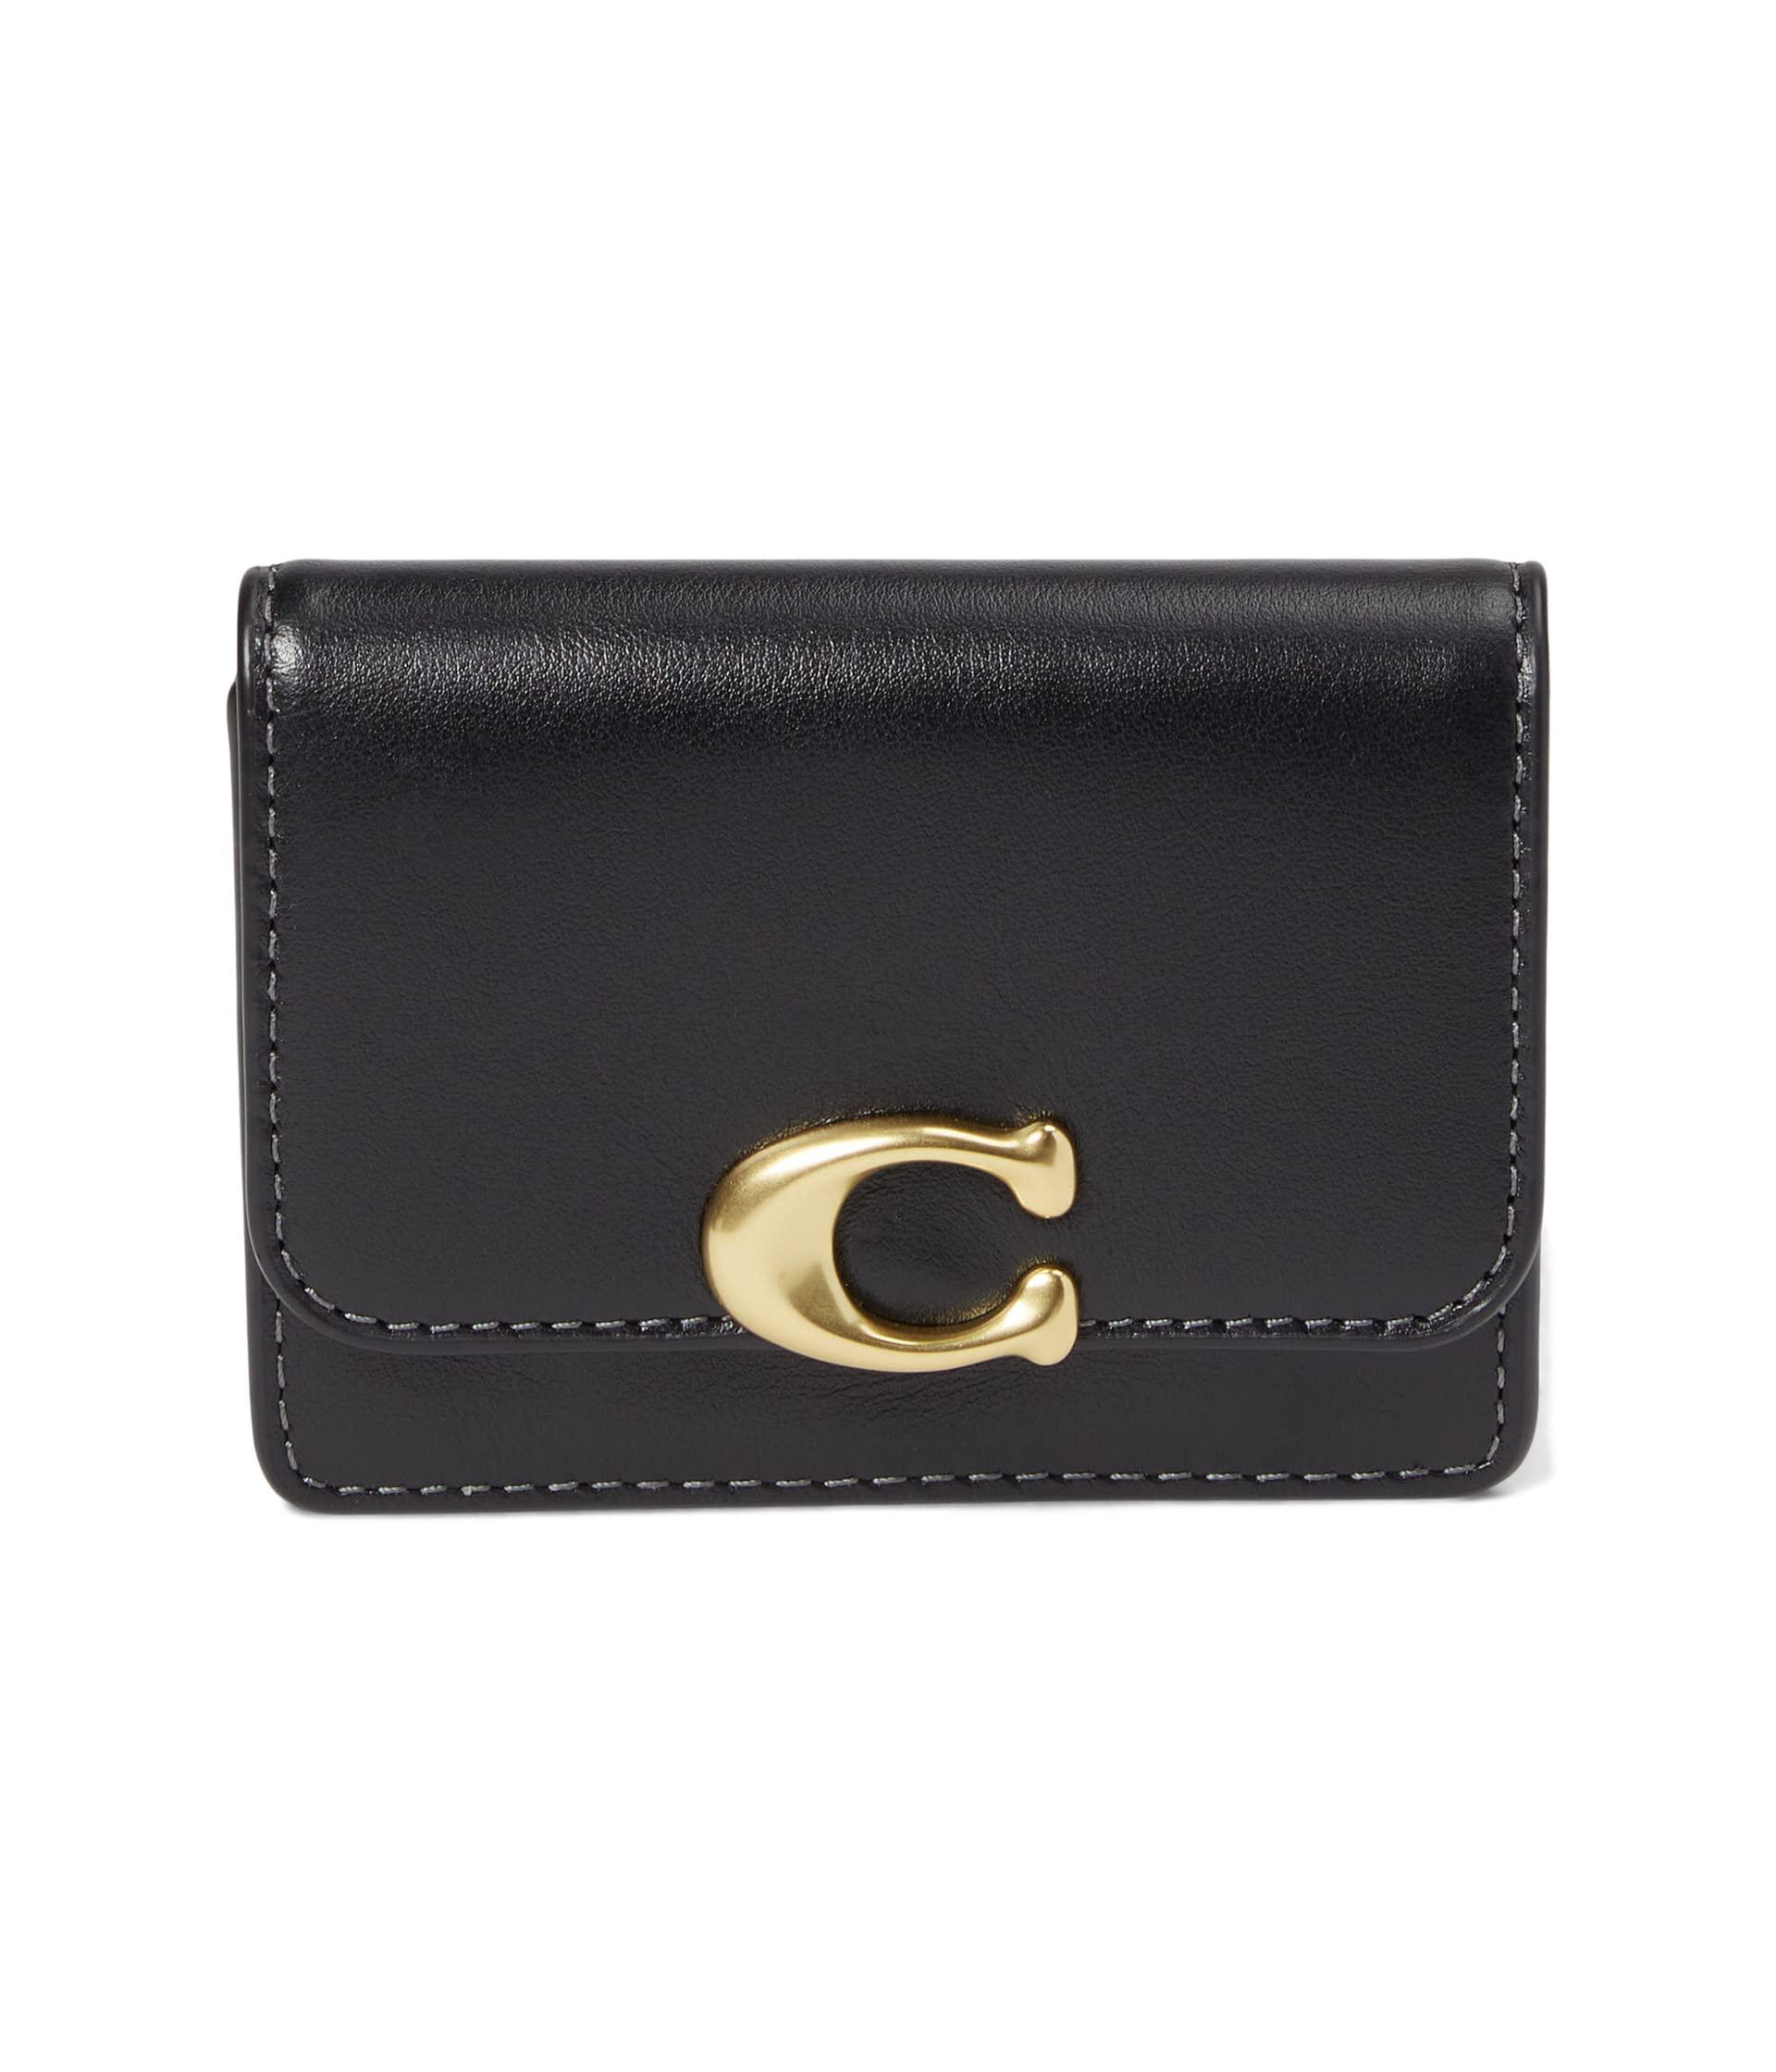 COACH Luxe Refined Calf Leather Bandit Card Case in Black | Lyst